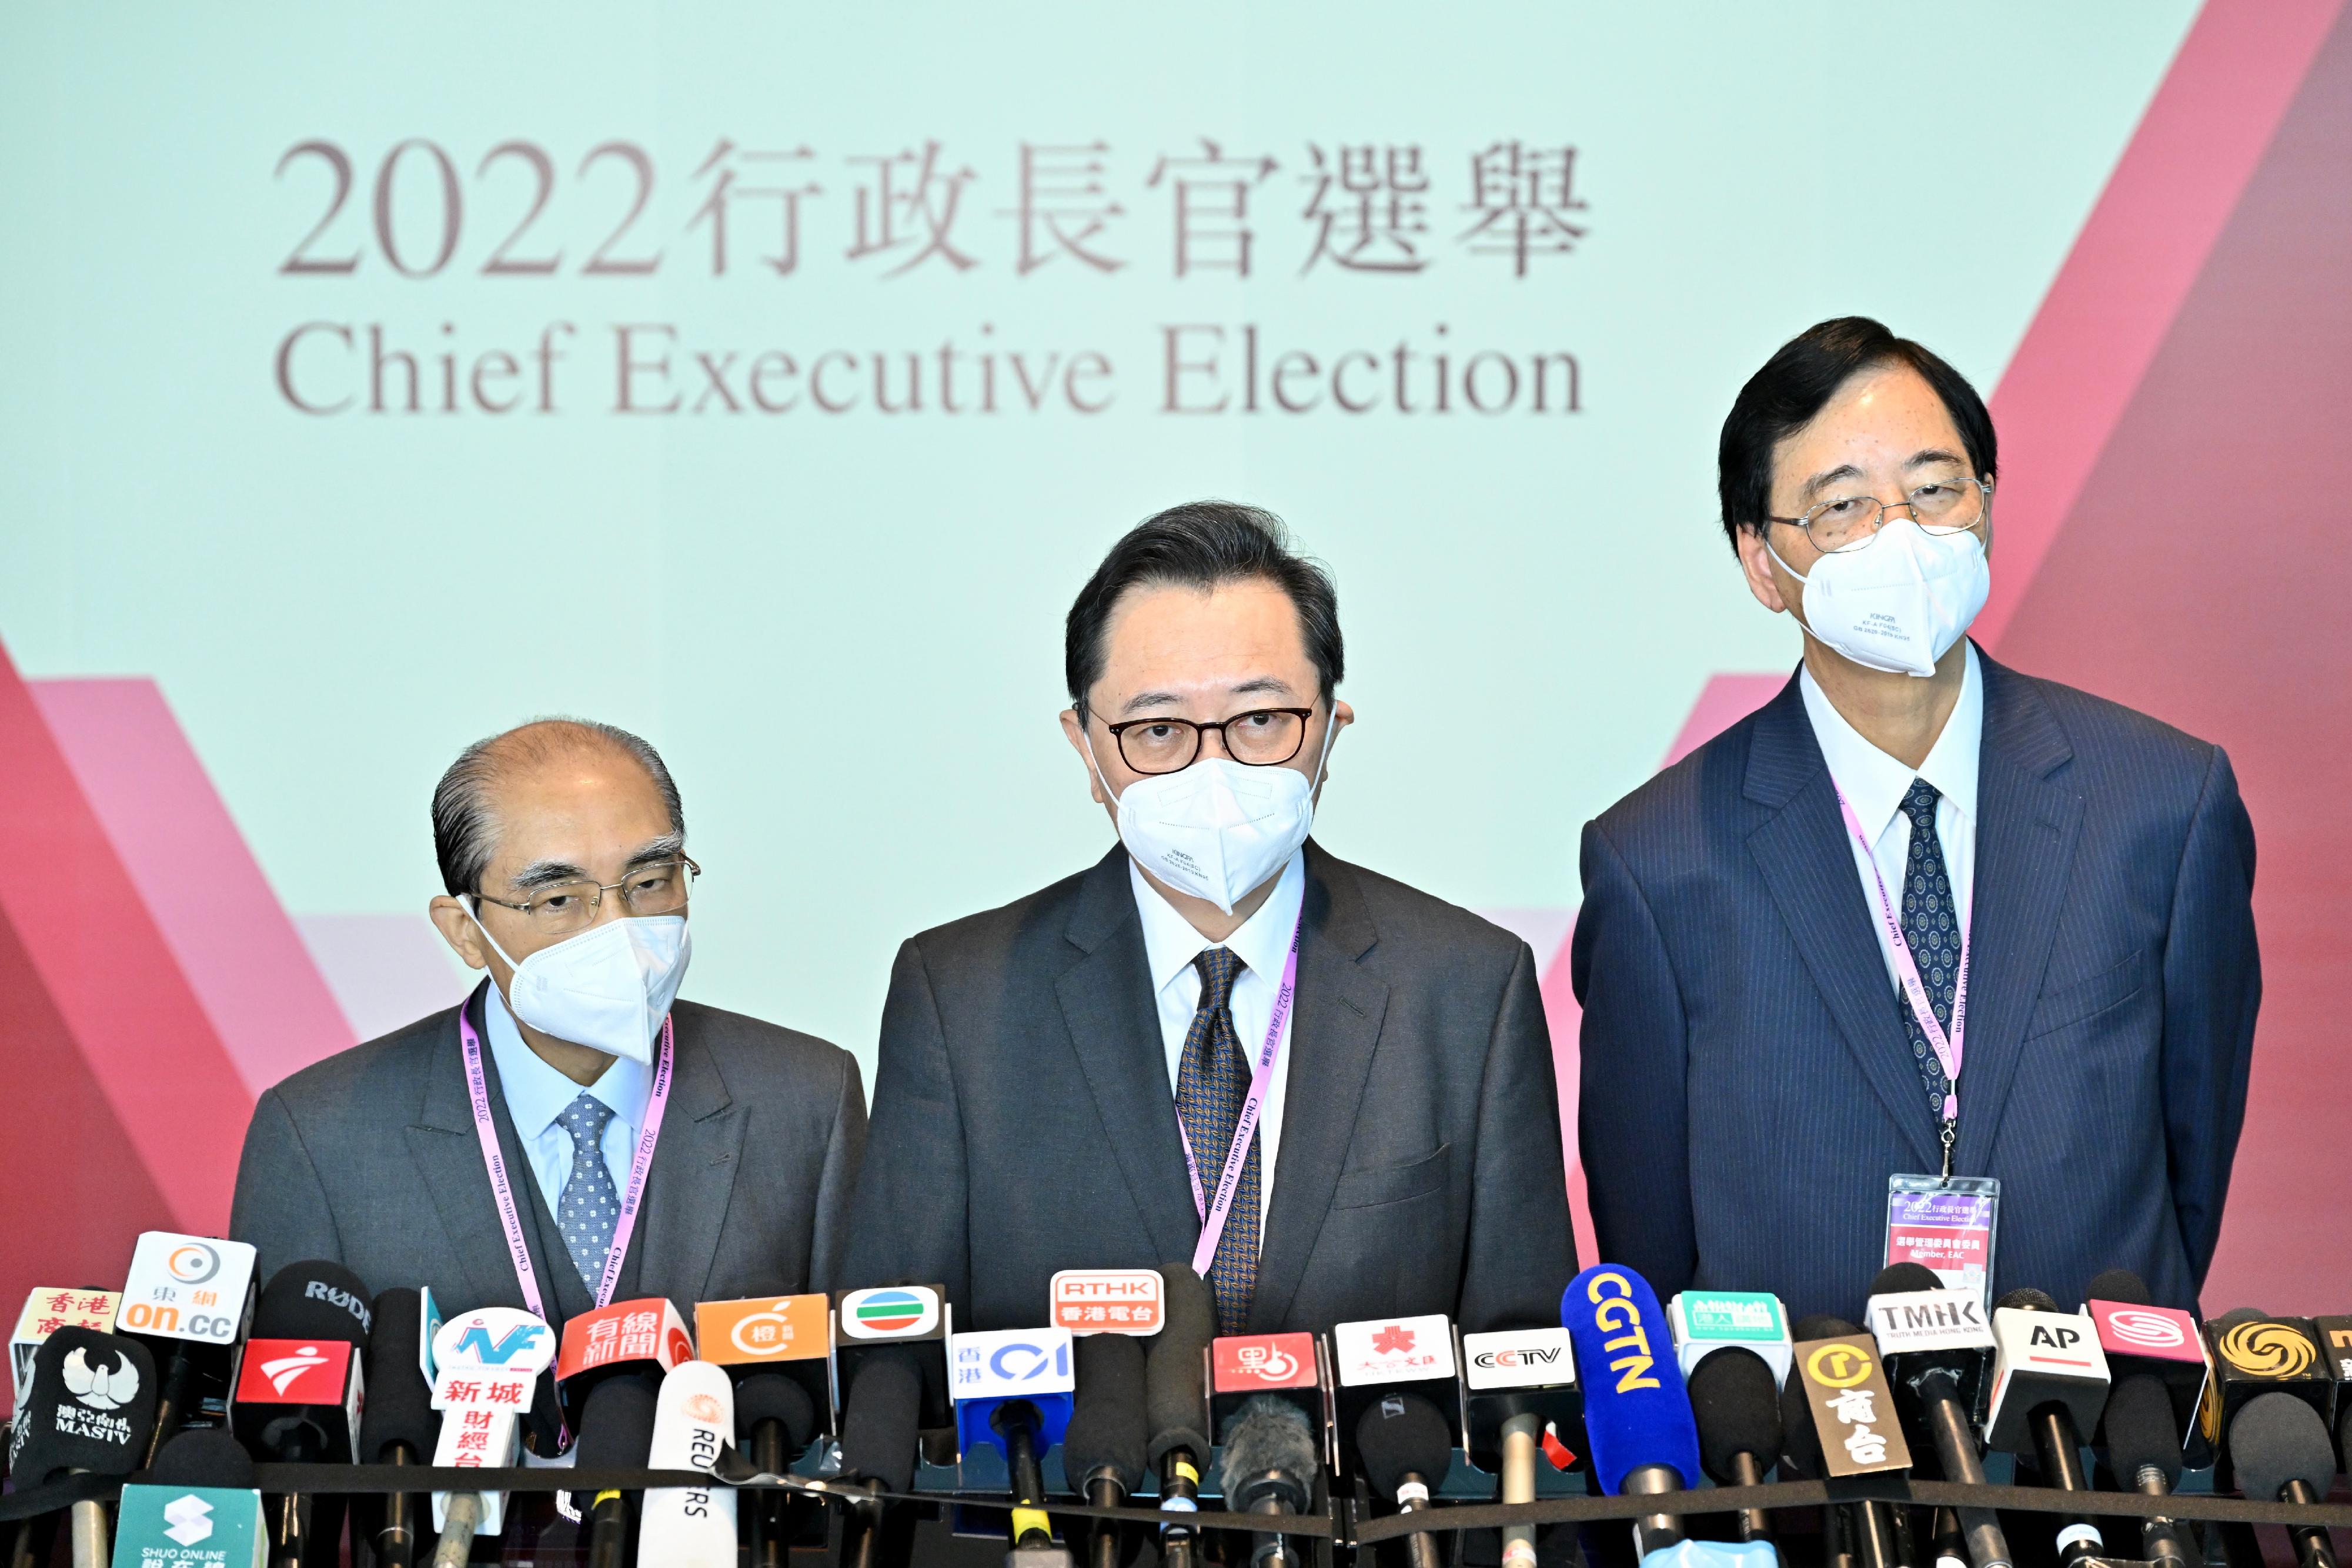 The Chairman of the Electoral Affairs Commission (EAC), Mr Justice Barnabas Fung Wah (centre); EAC members Mr Arthur Luk, SC (left), and Professor Daniel Shek (right), meet the media this morning (May 8) after visiting the main polling station of the 2022 Chief Executive Election at the Hong Kong Convention and Exhibition Centre in Wan Chai.